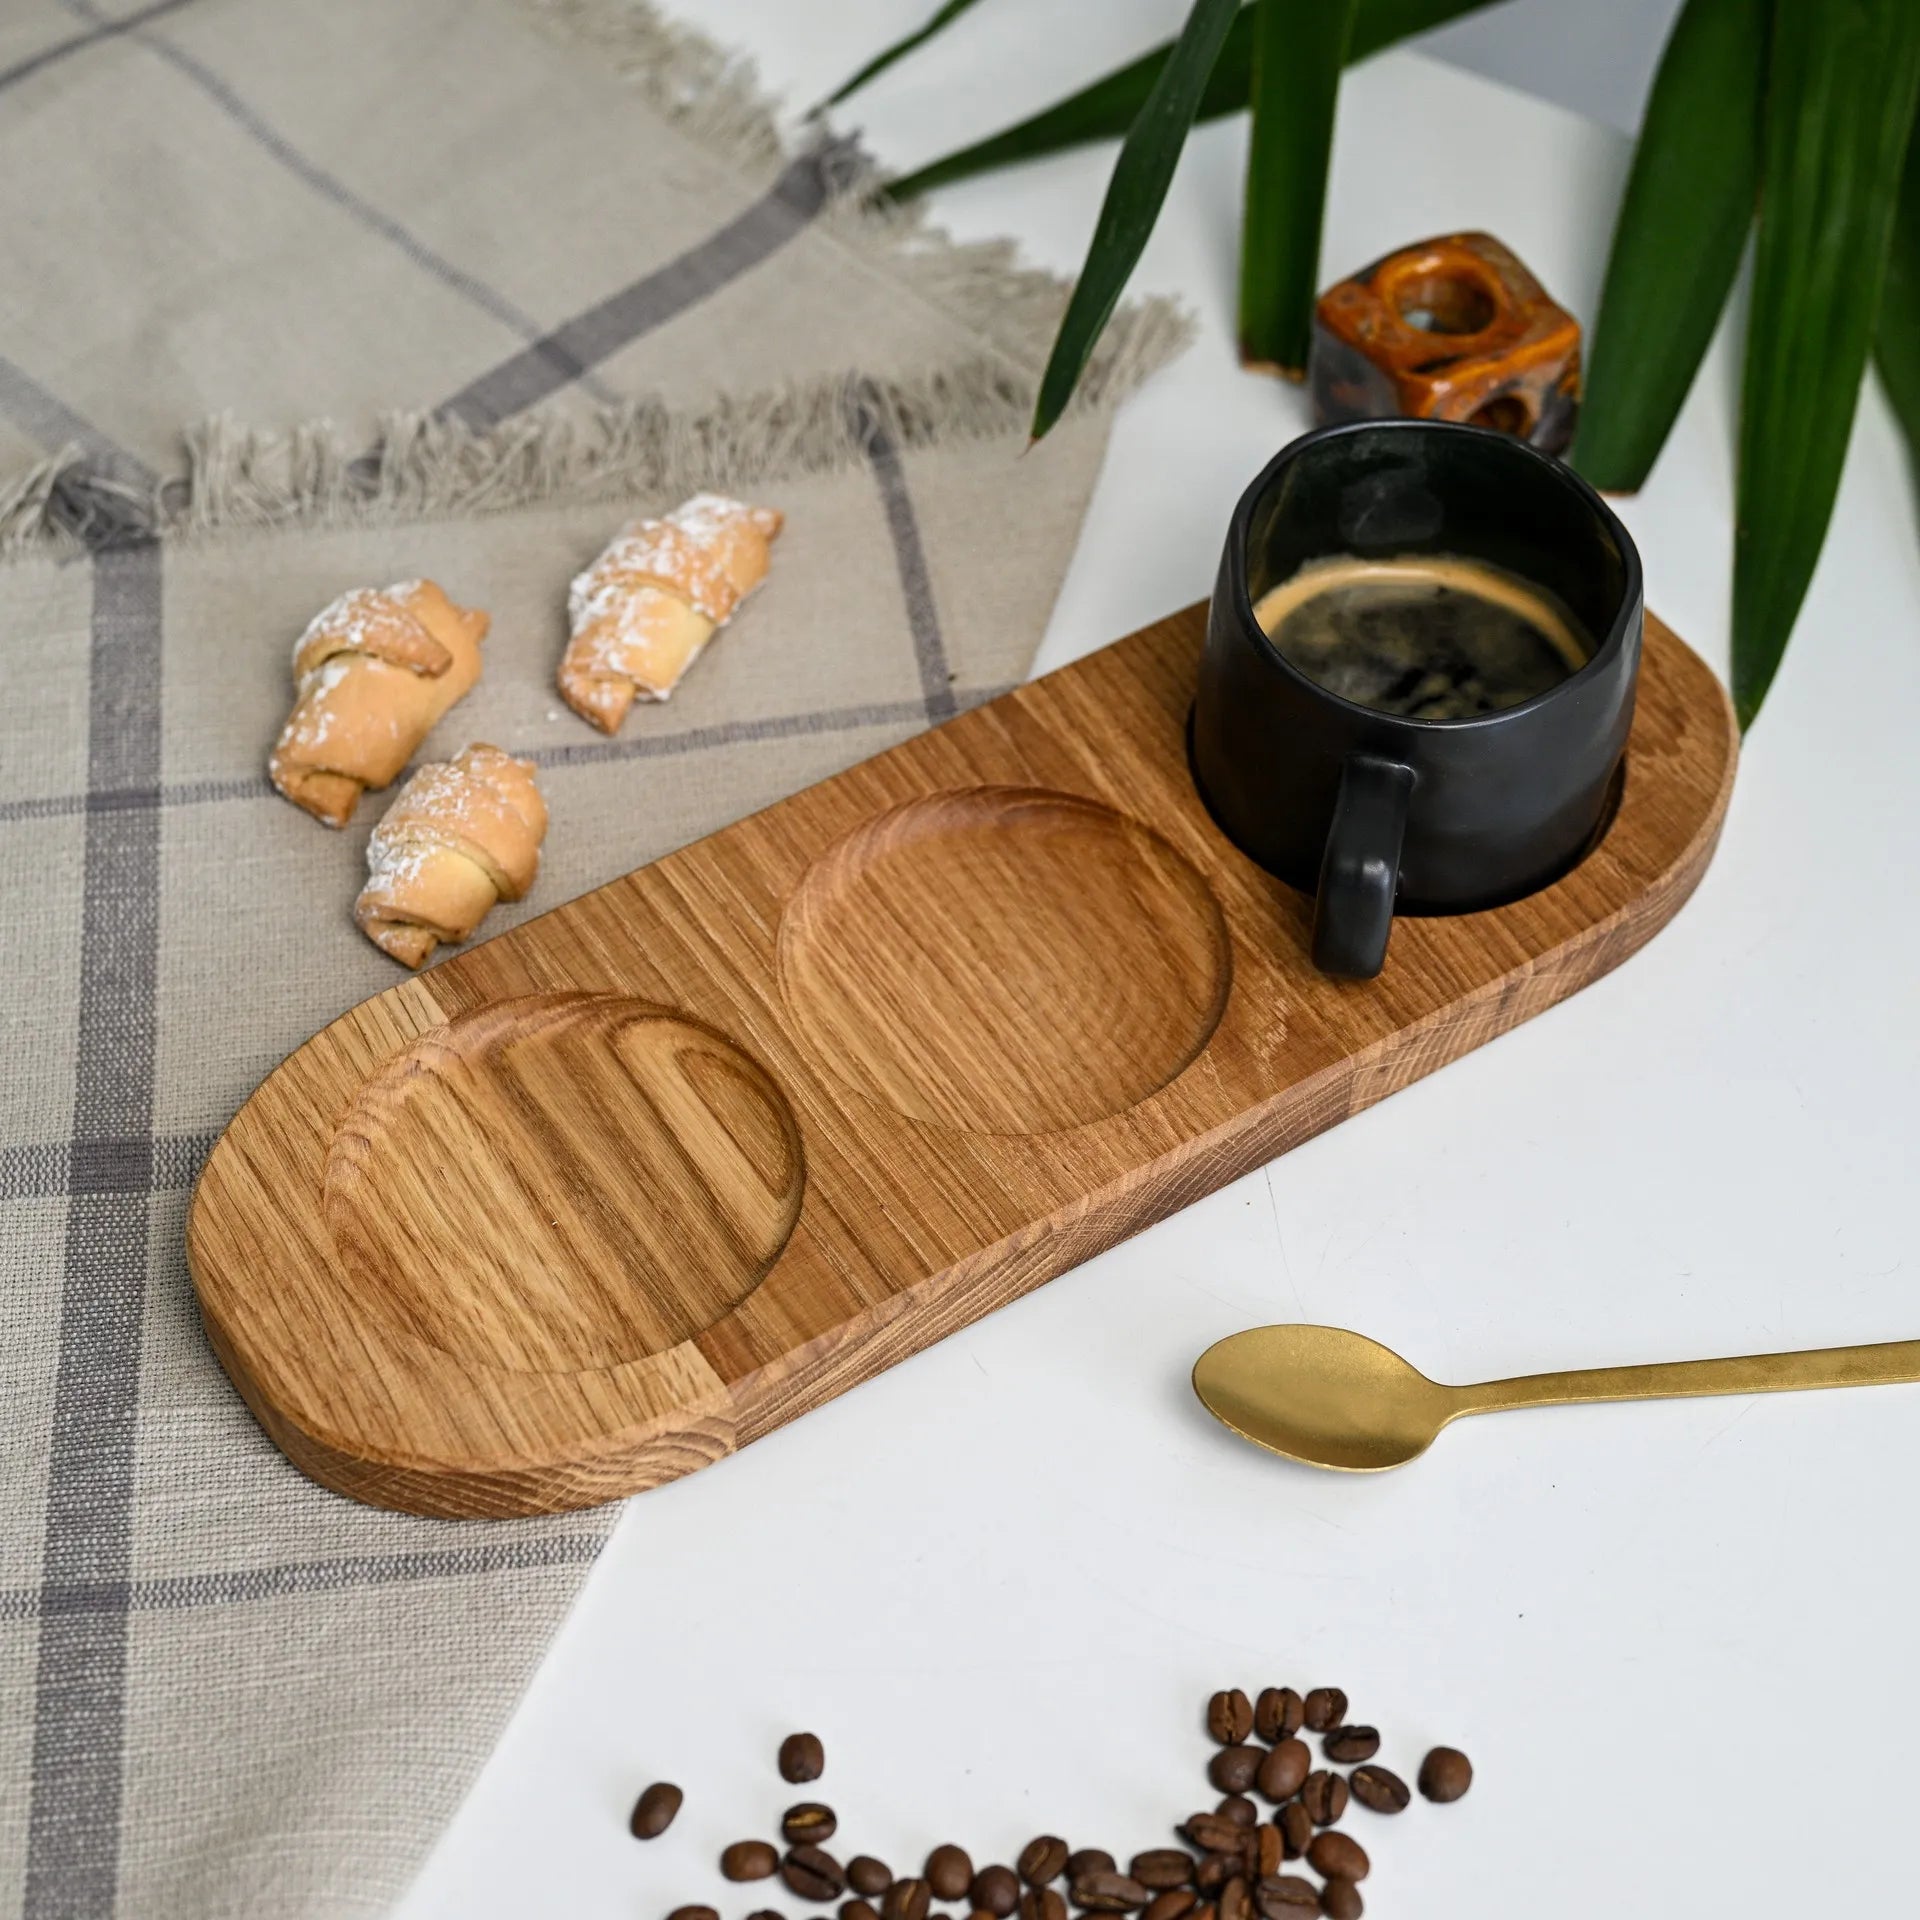 Rustic wood serving board for kitchen use, perfect for preparing and serving food with a touch of rustic elegance.